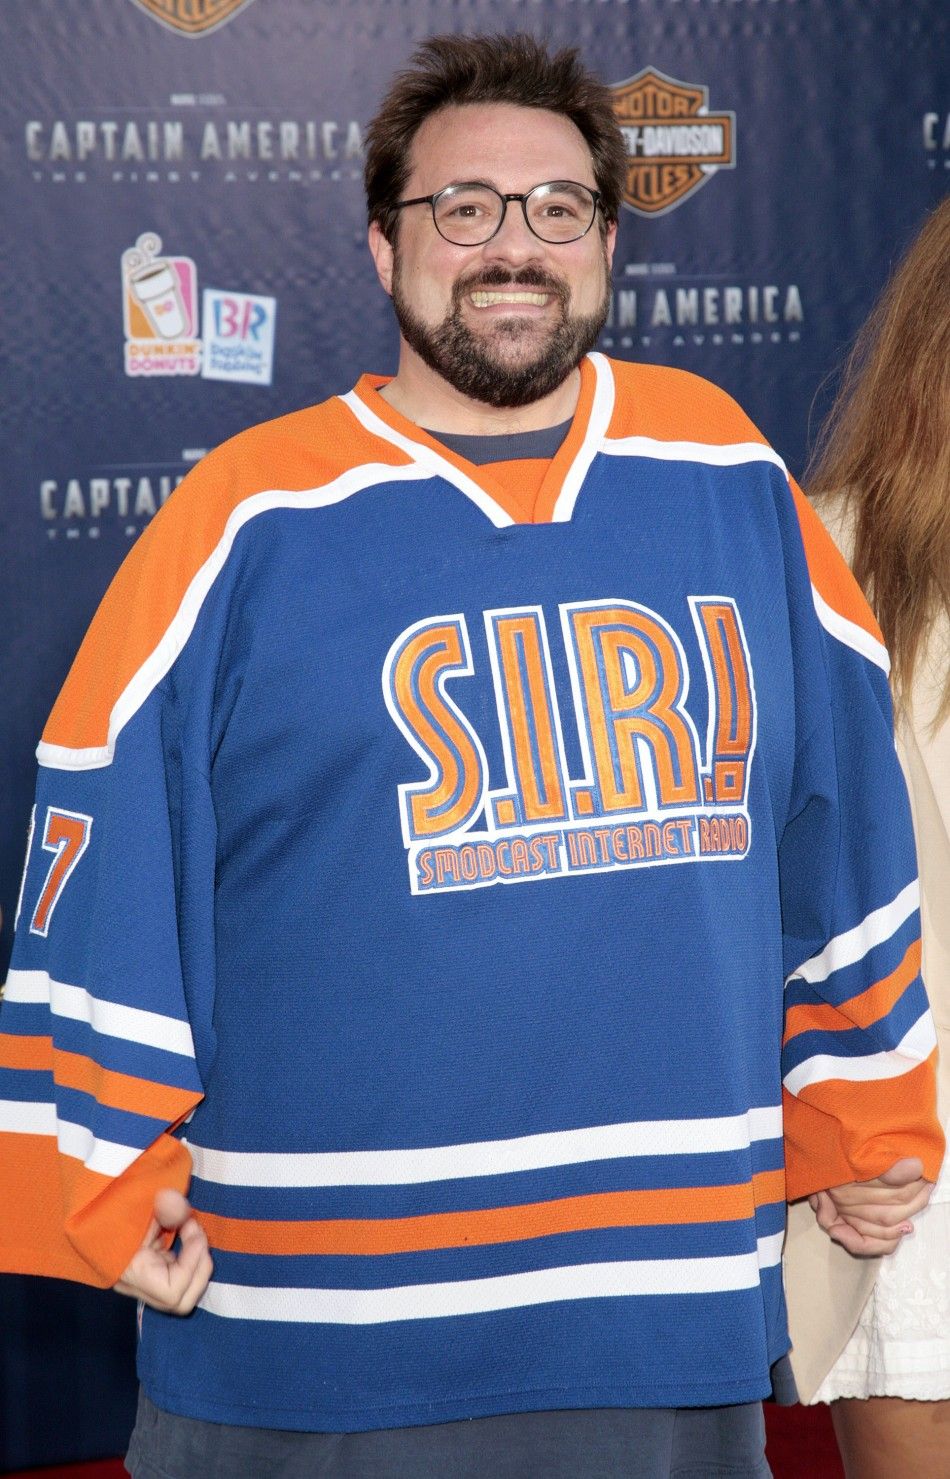 Kevin Smith for being oversized 